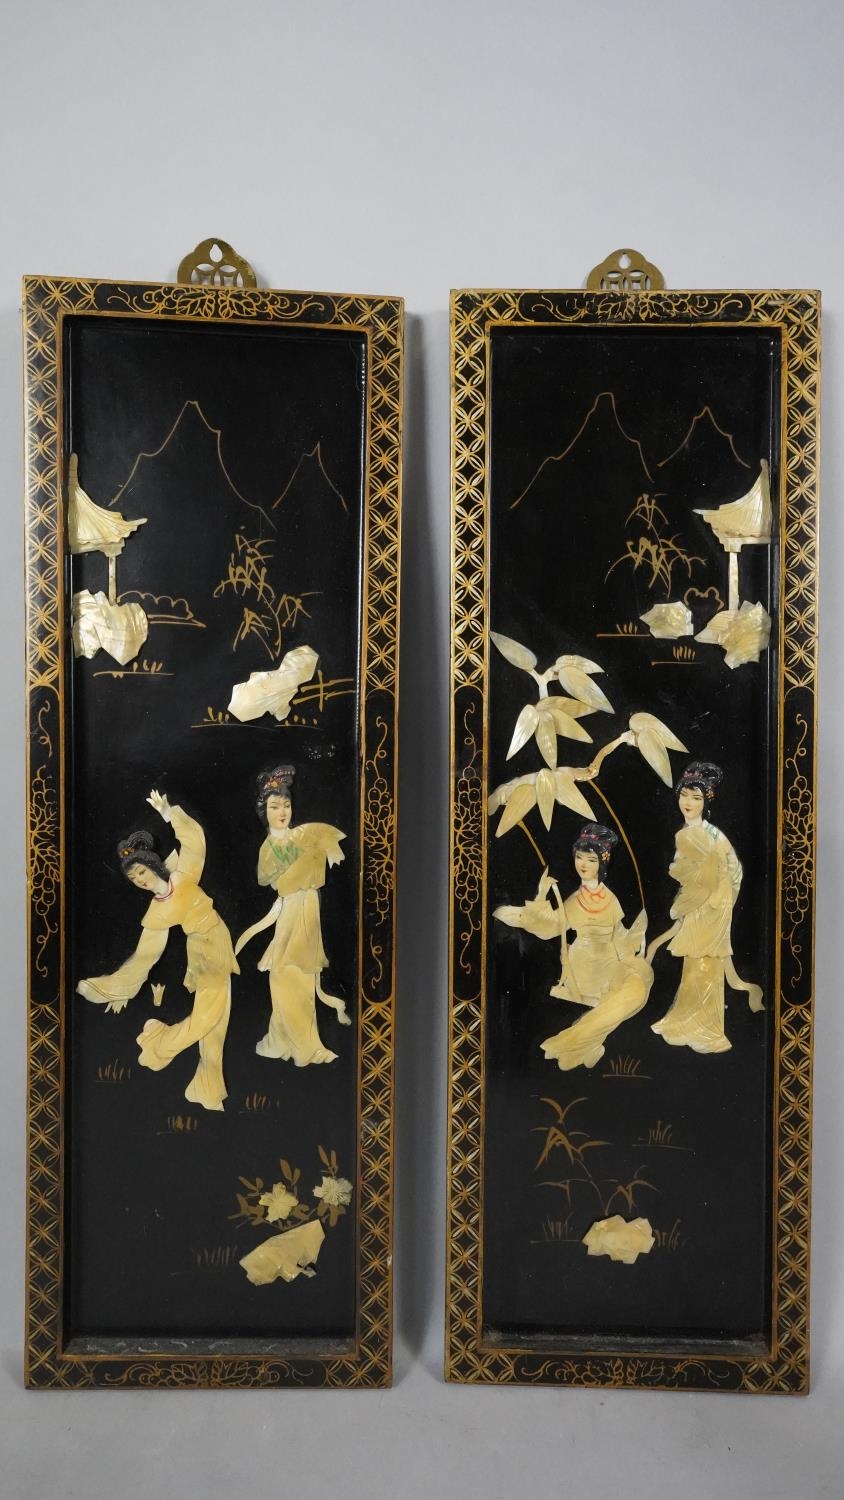 Two vintage Japanese lacquered wooden plaques with gilded borders, mounted with bone and mother of